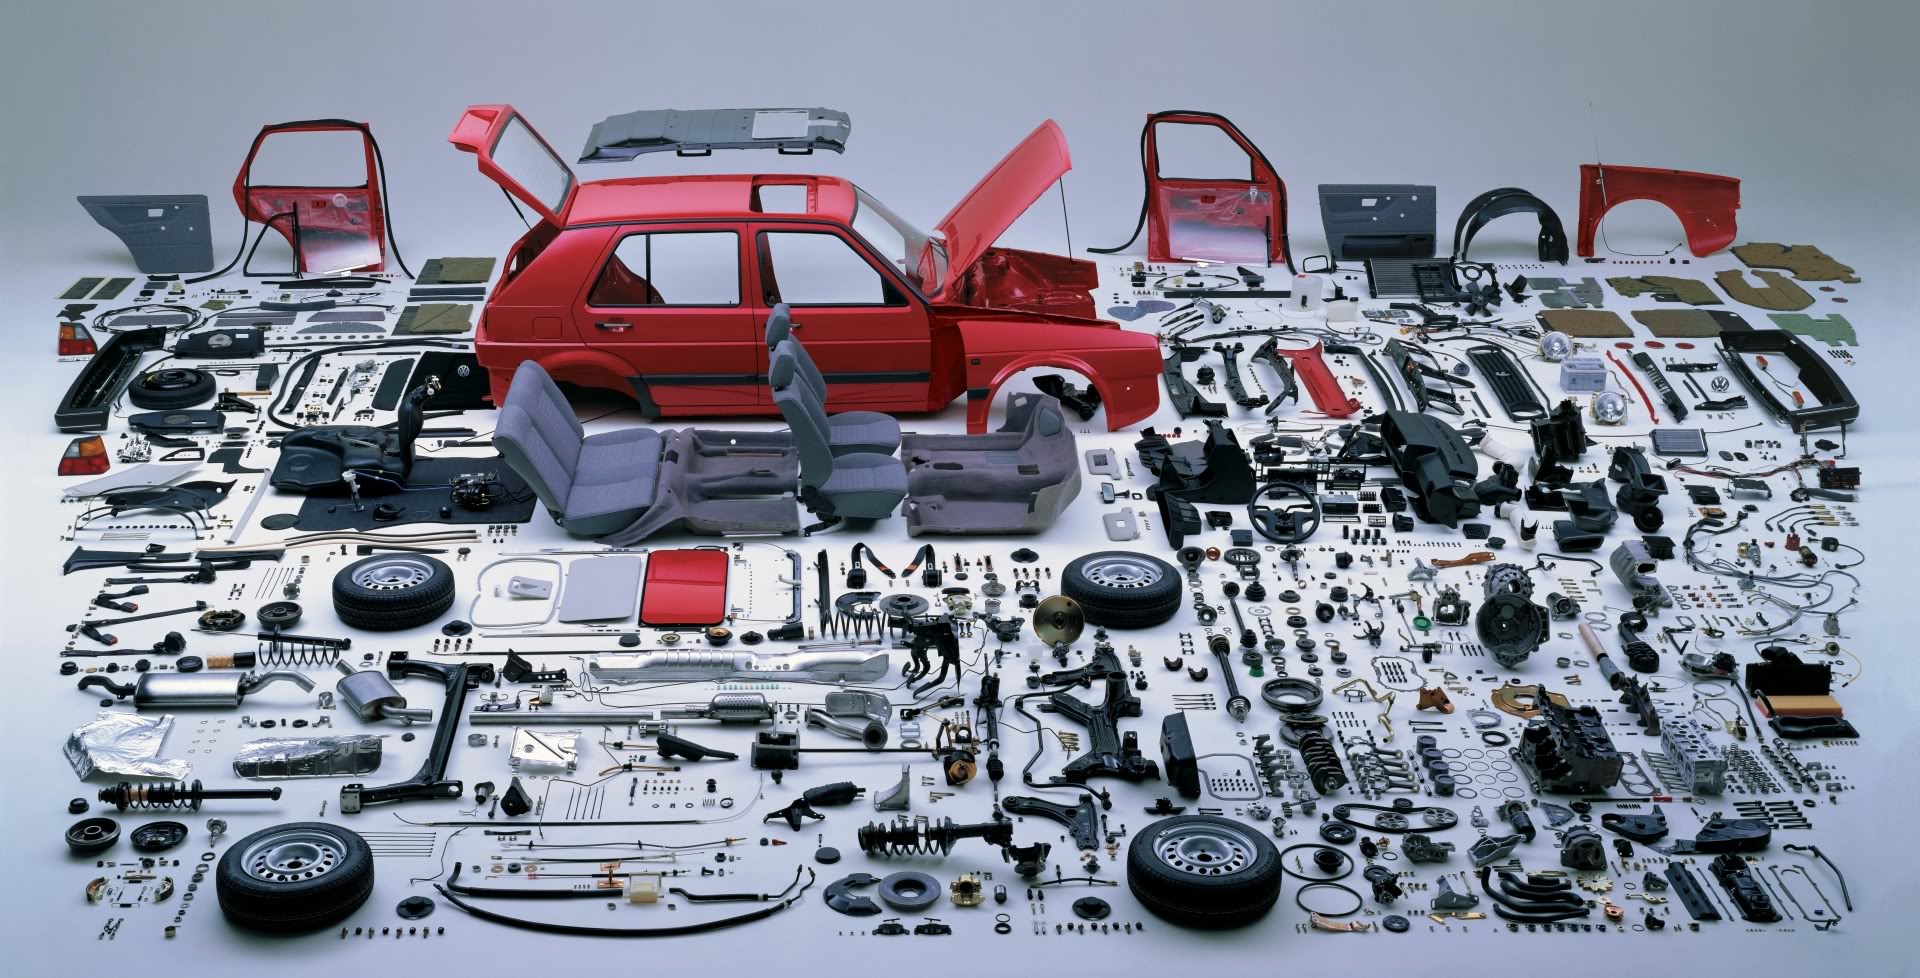 Every part needed to build a VW Golf